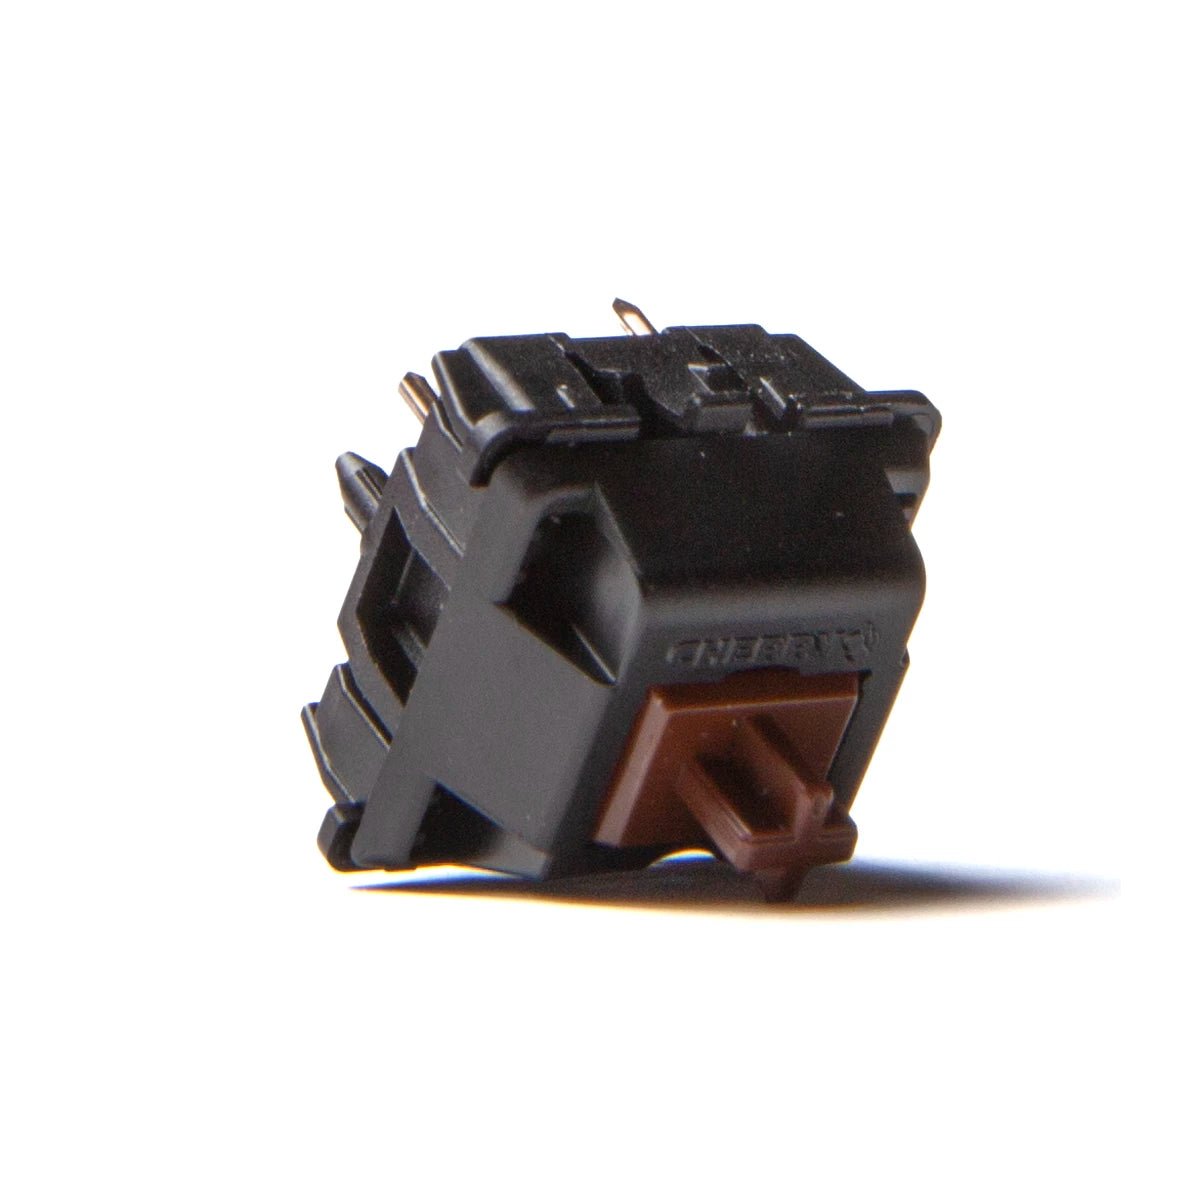 Cherry MX2A Brown Tactile Switches - Divinikey